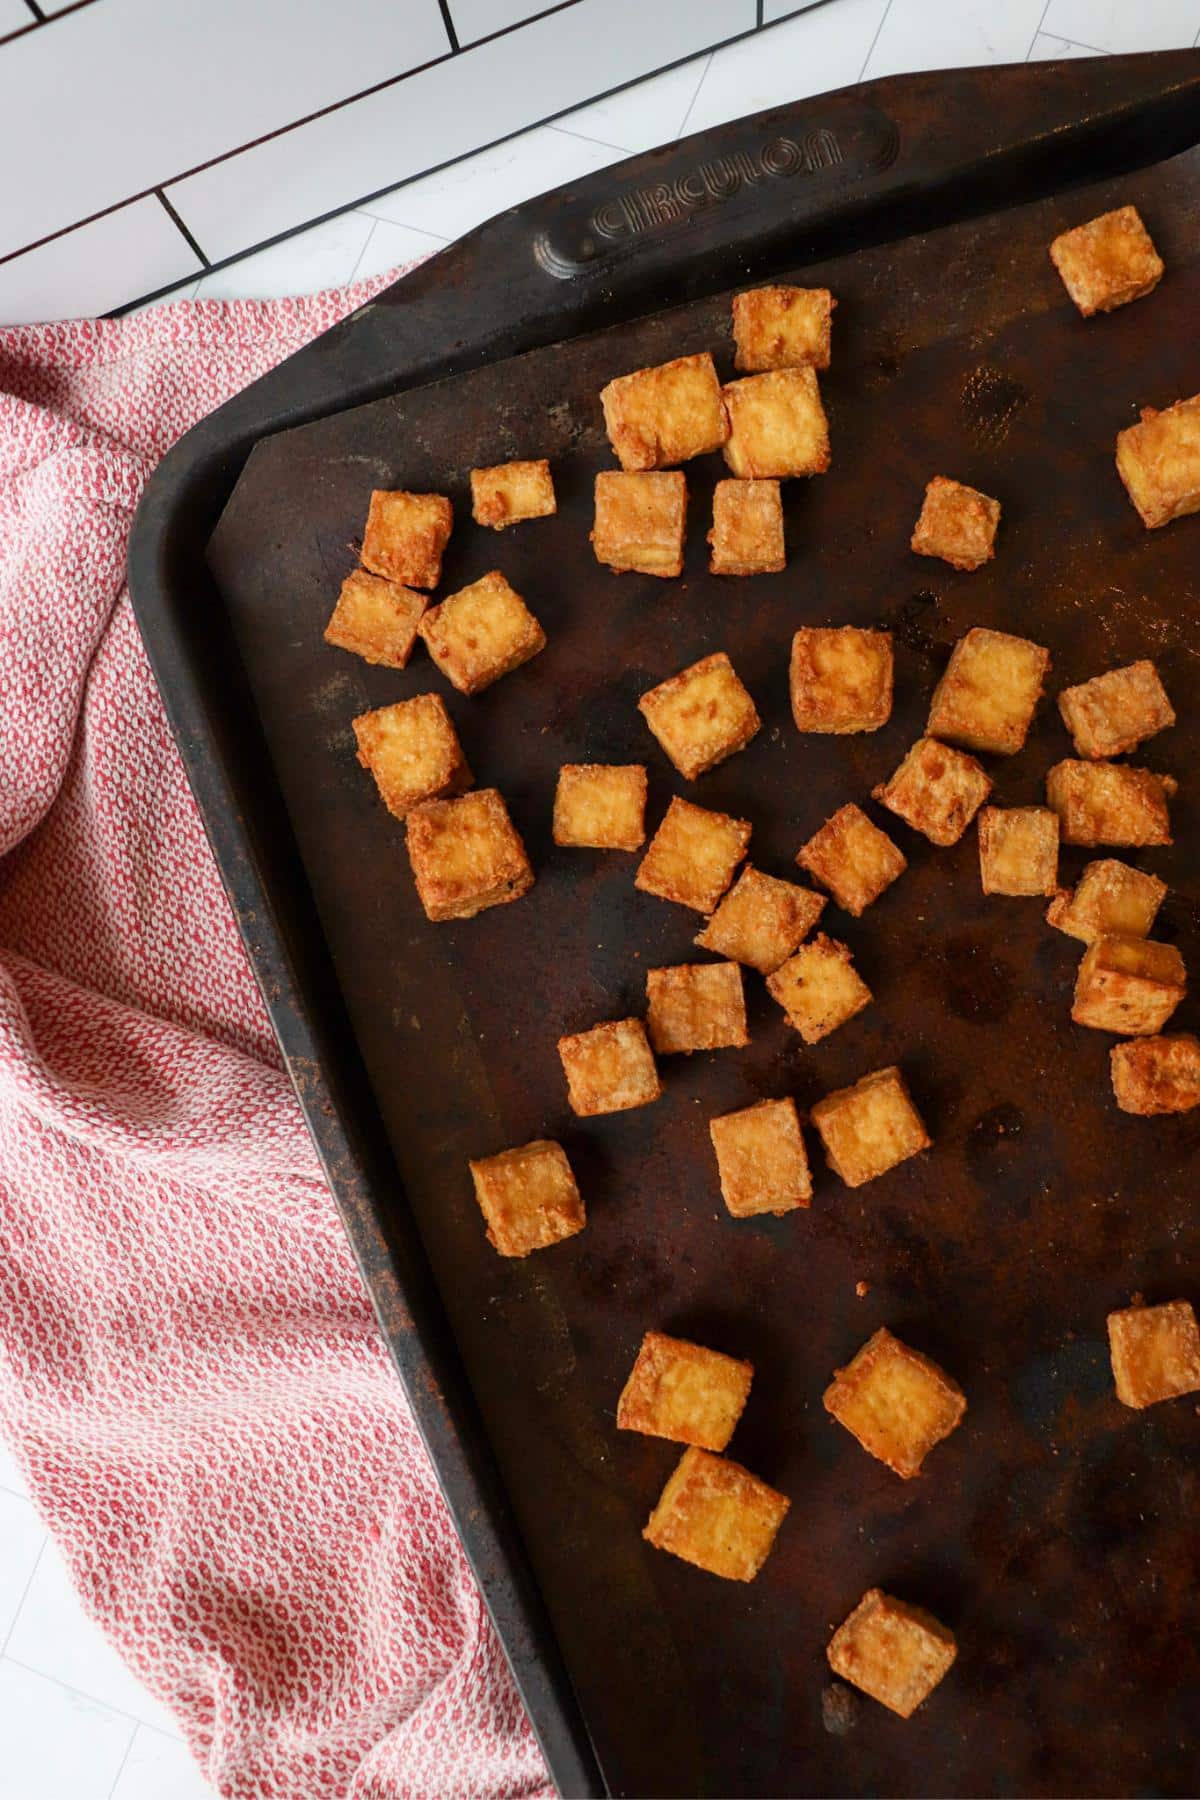 Crispy baked tofu cubes on a baking sheet after coming out of the oven.